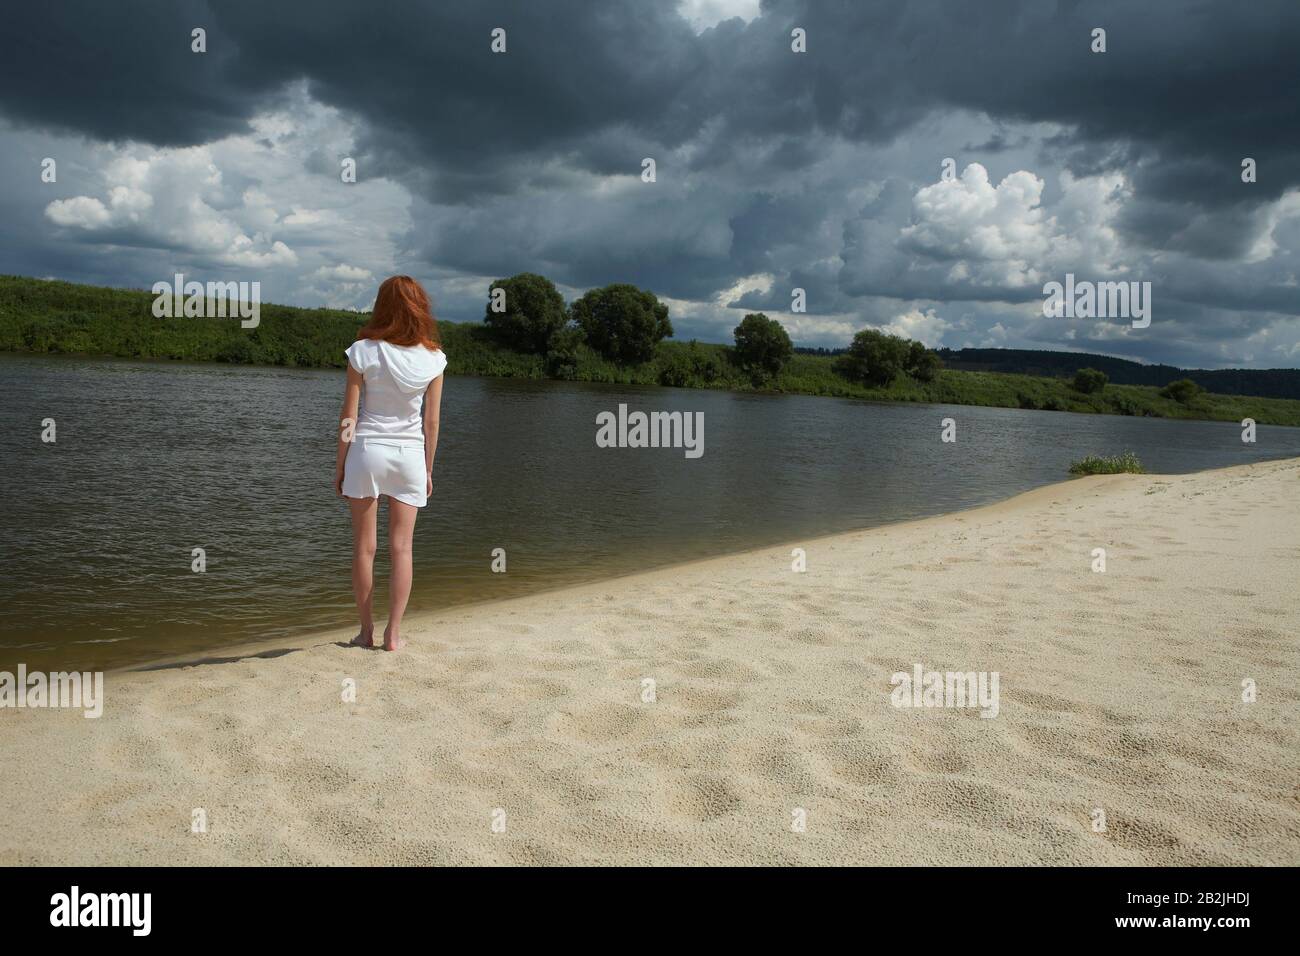 Woman Standing by River under Storm Clouds Stock Photo